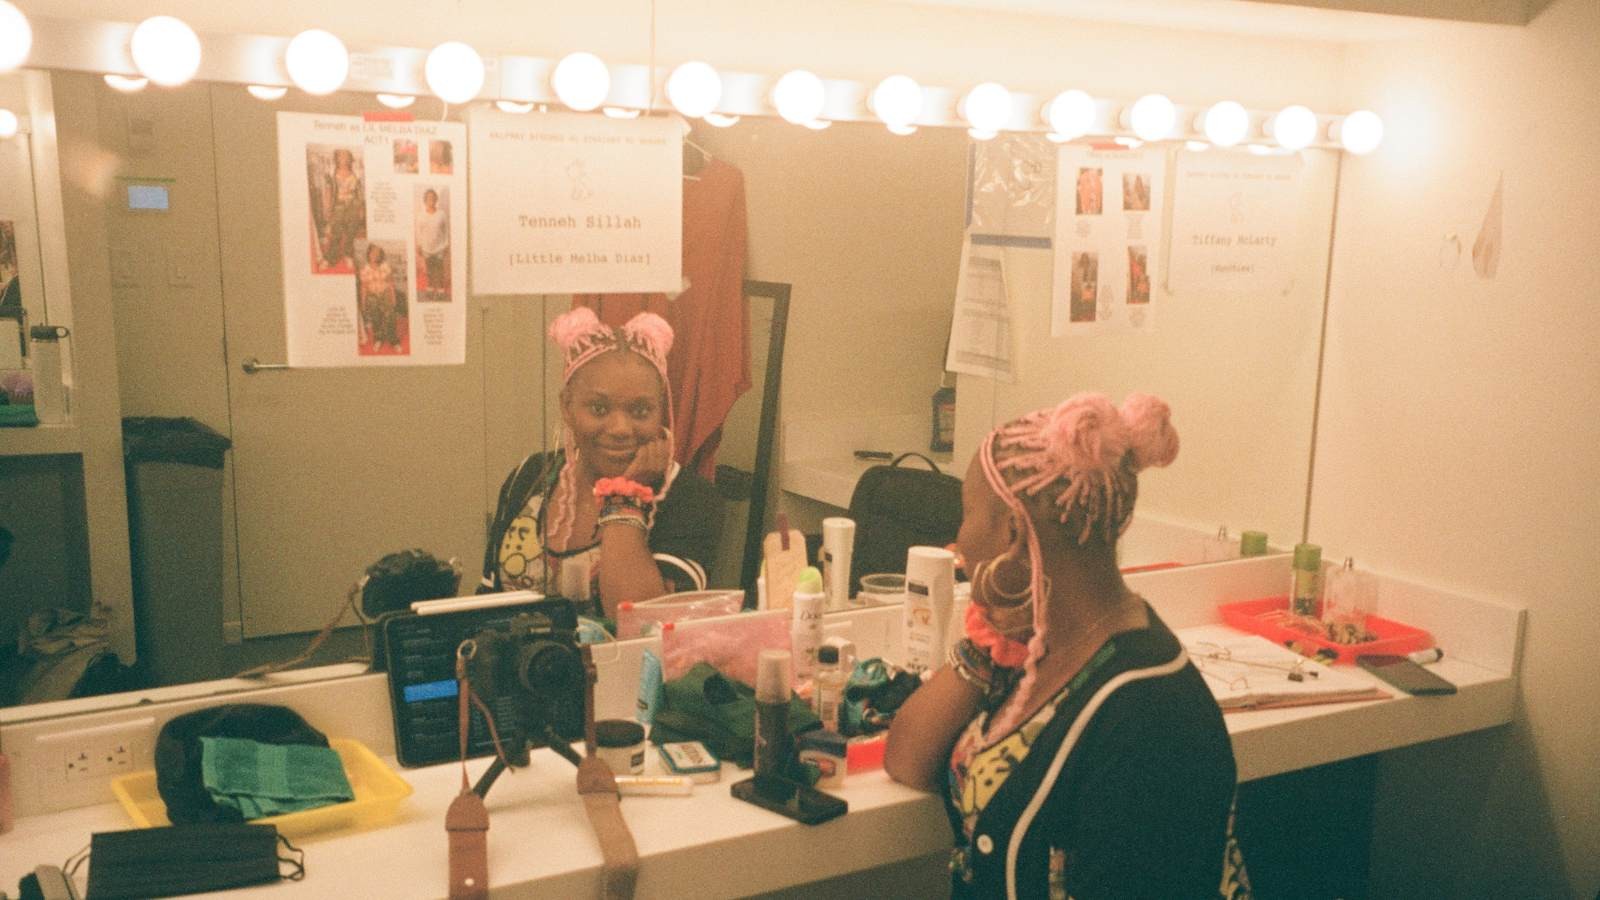 Tenneh backstage poses for photo in the mirror